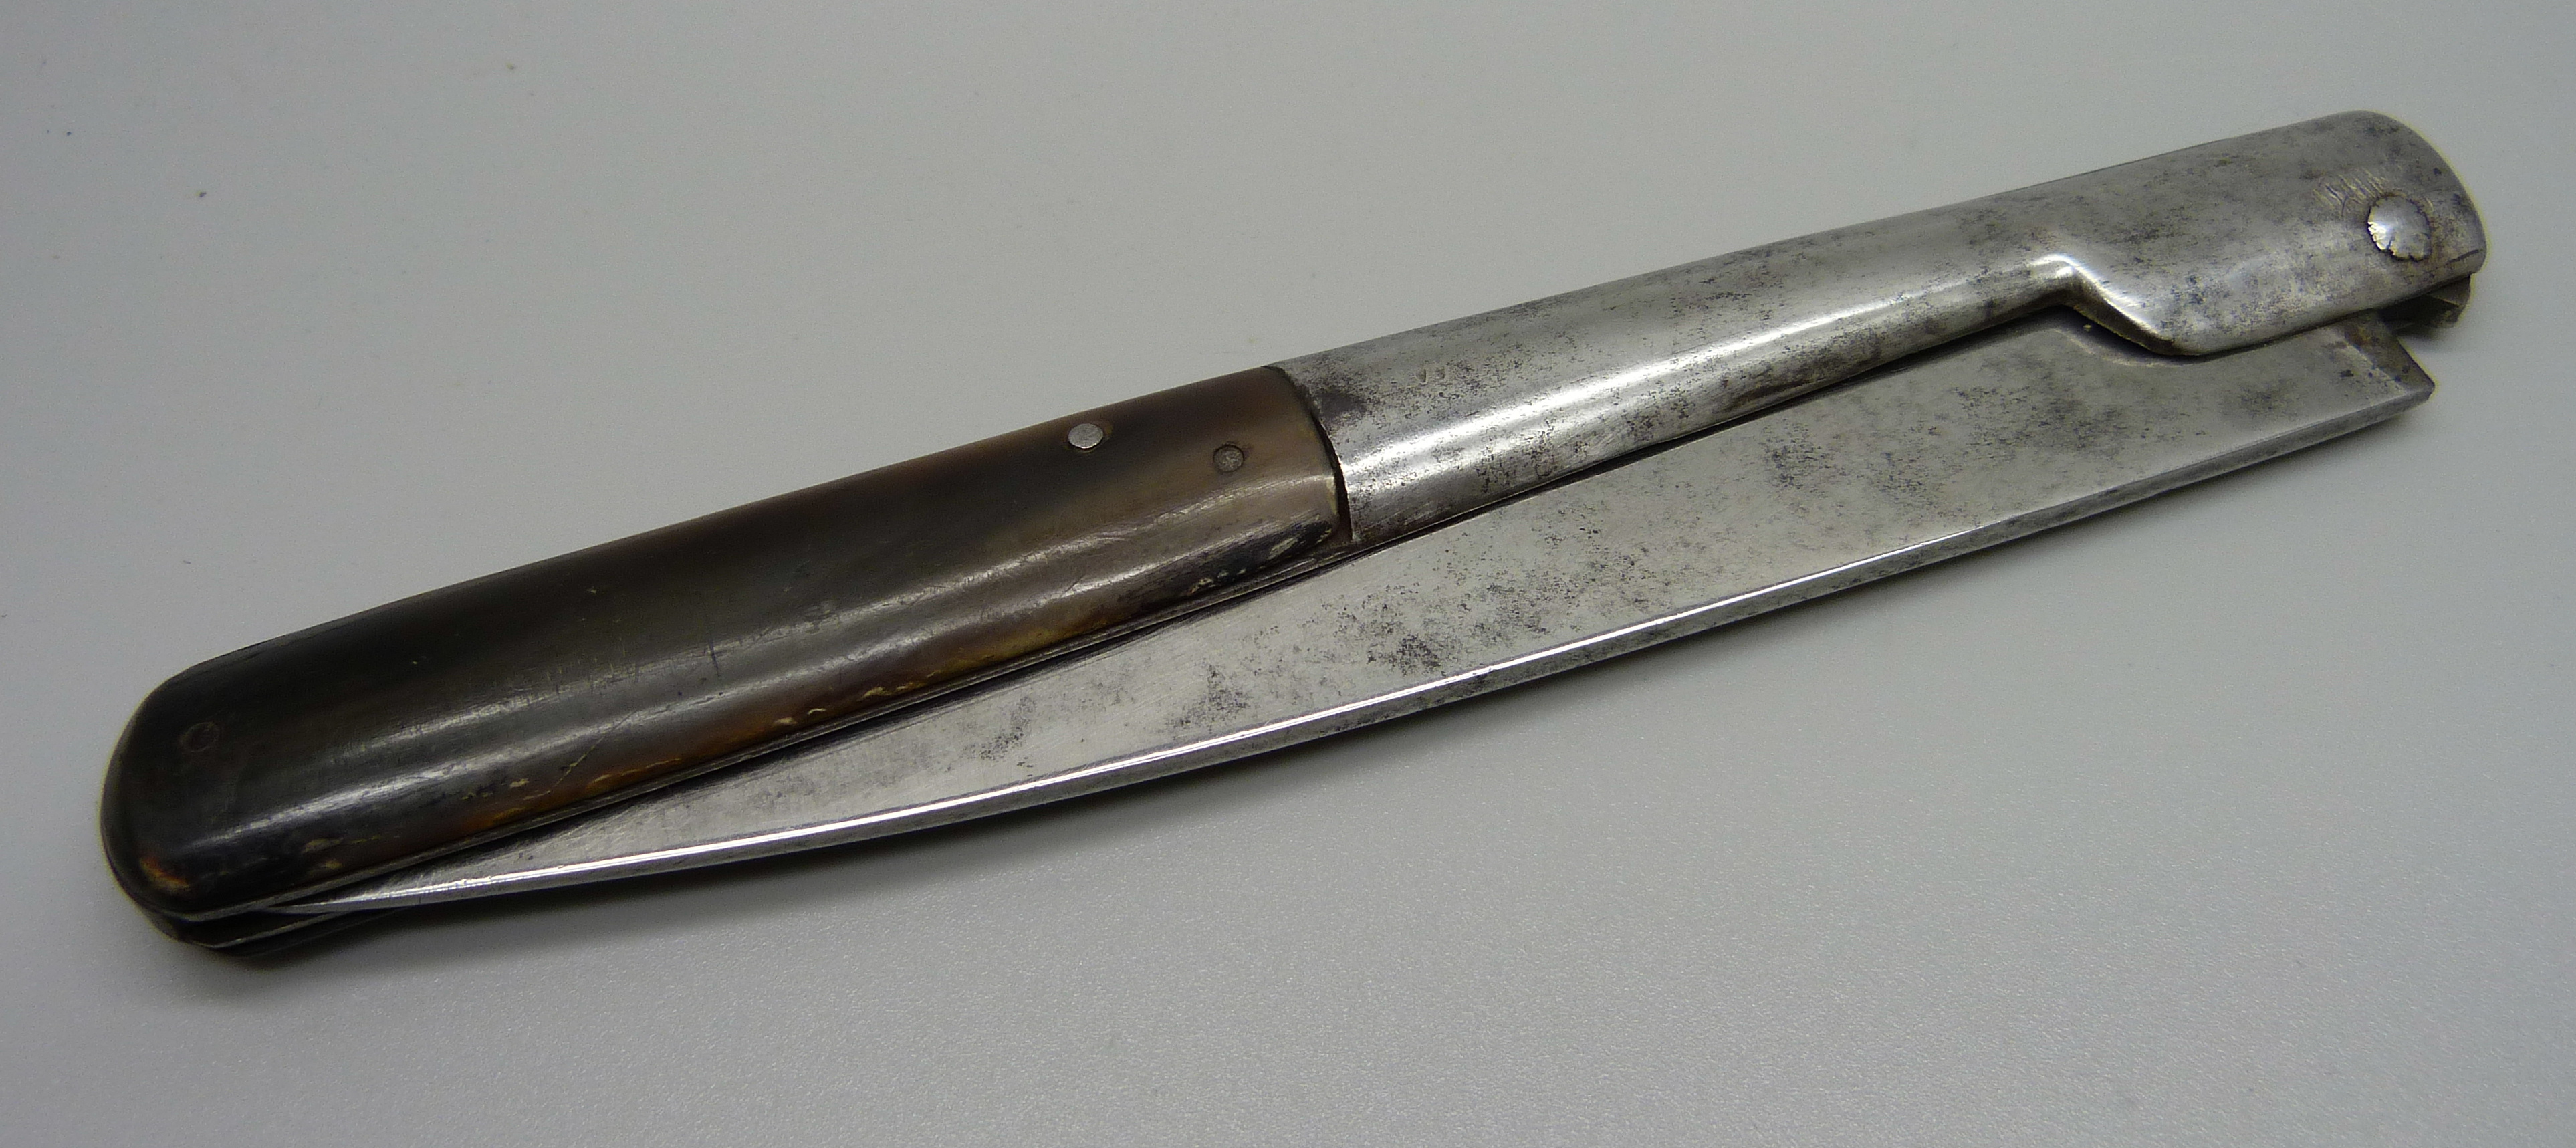 A Louis Vauzy folding knife with horn handle, 35cm open - Image 3 of 3